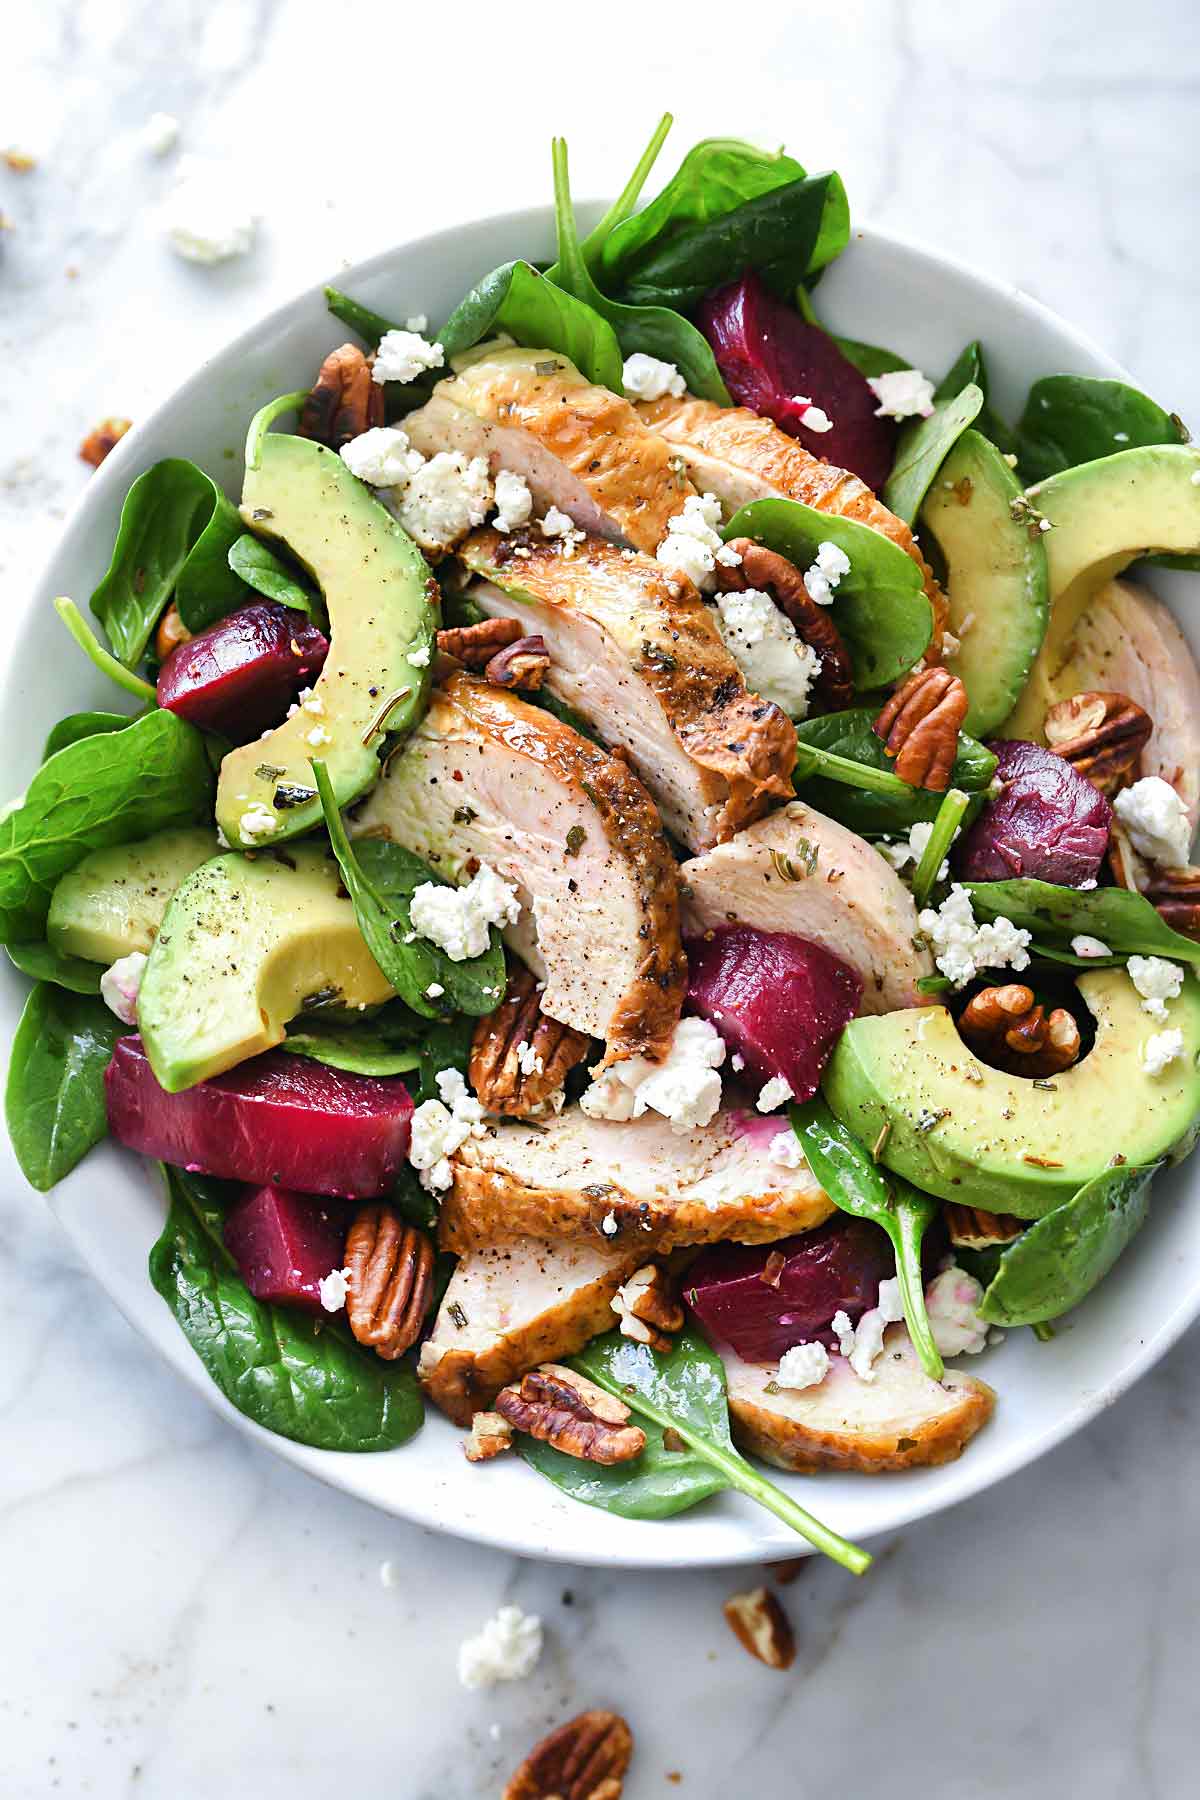 Roasted Beet, Avocado And Goat Cheese Spinach Salad With Chicken ...